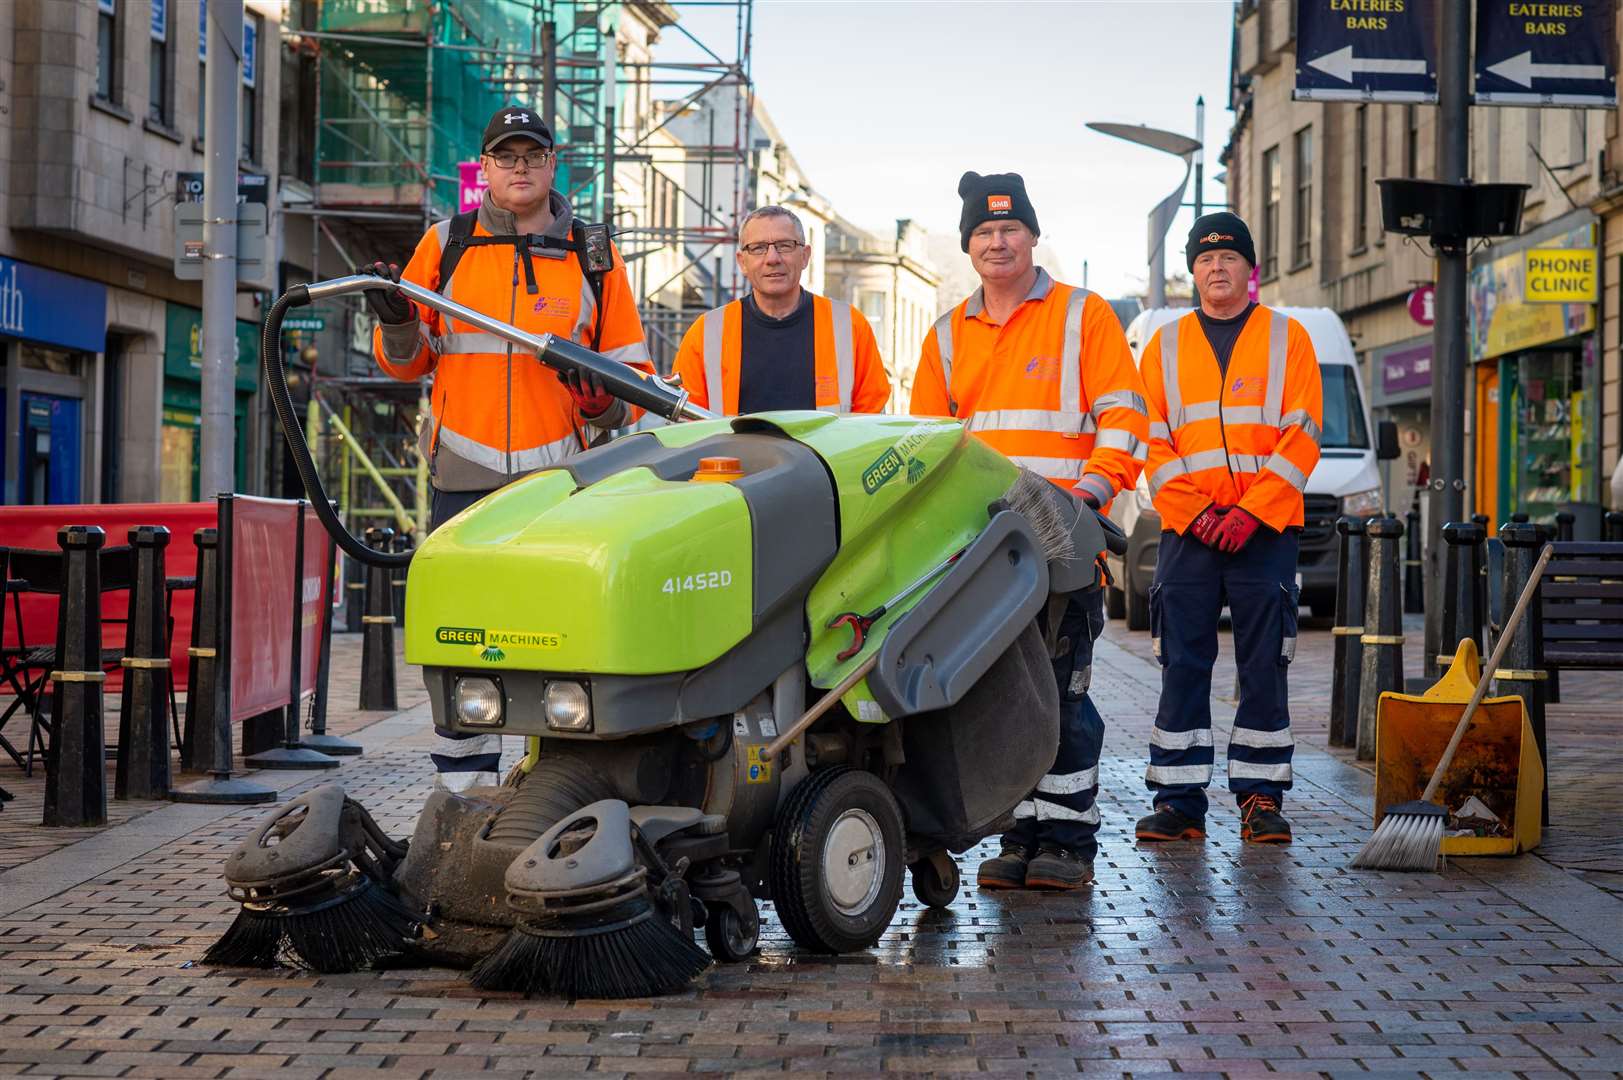 Inverness city centre street cleaners..Alan Graham, manager Mick Hayner, Martin McDougall and .Micke Bryce.